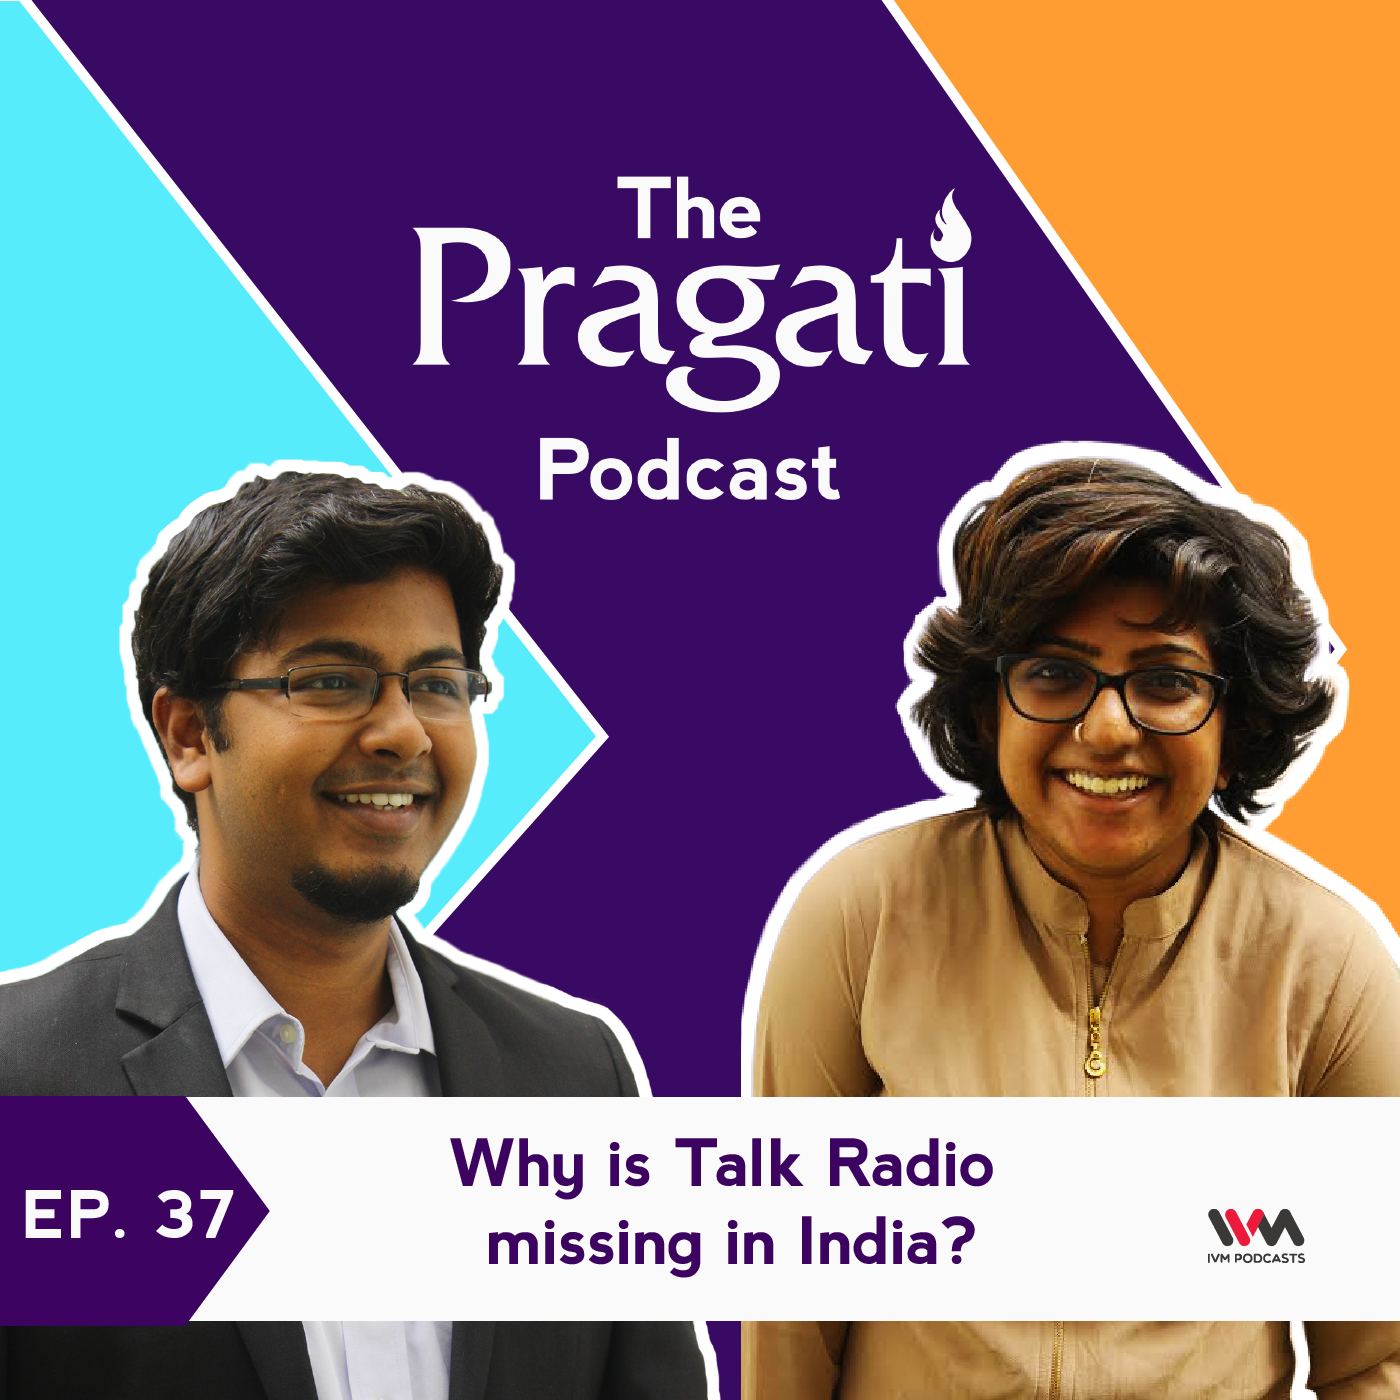 Ep. 37: Why is Talk Radio missing in India?